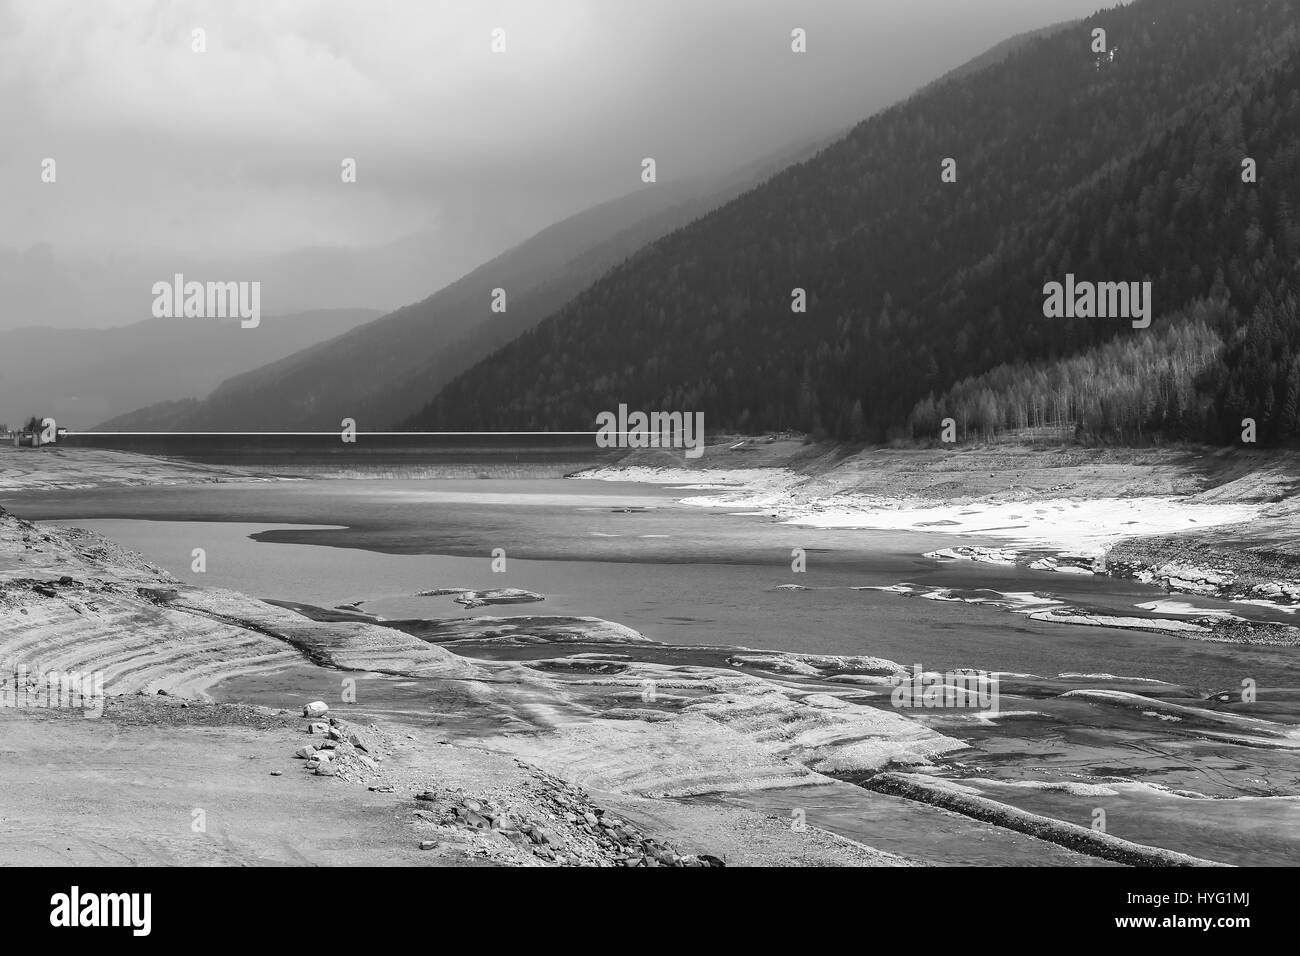 The reservoir Lago di Zoccolo in the Ulten Valley in South Tyrol. The lake is part of the waterpower production in the area. The picture is monochrome Stock Photo